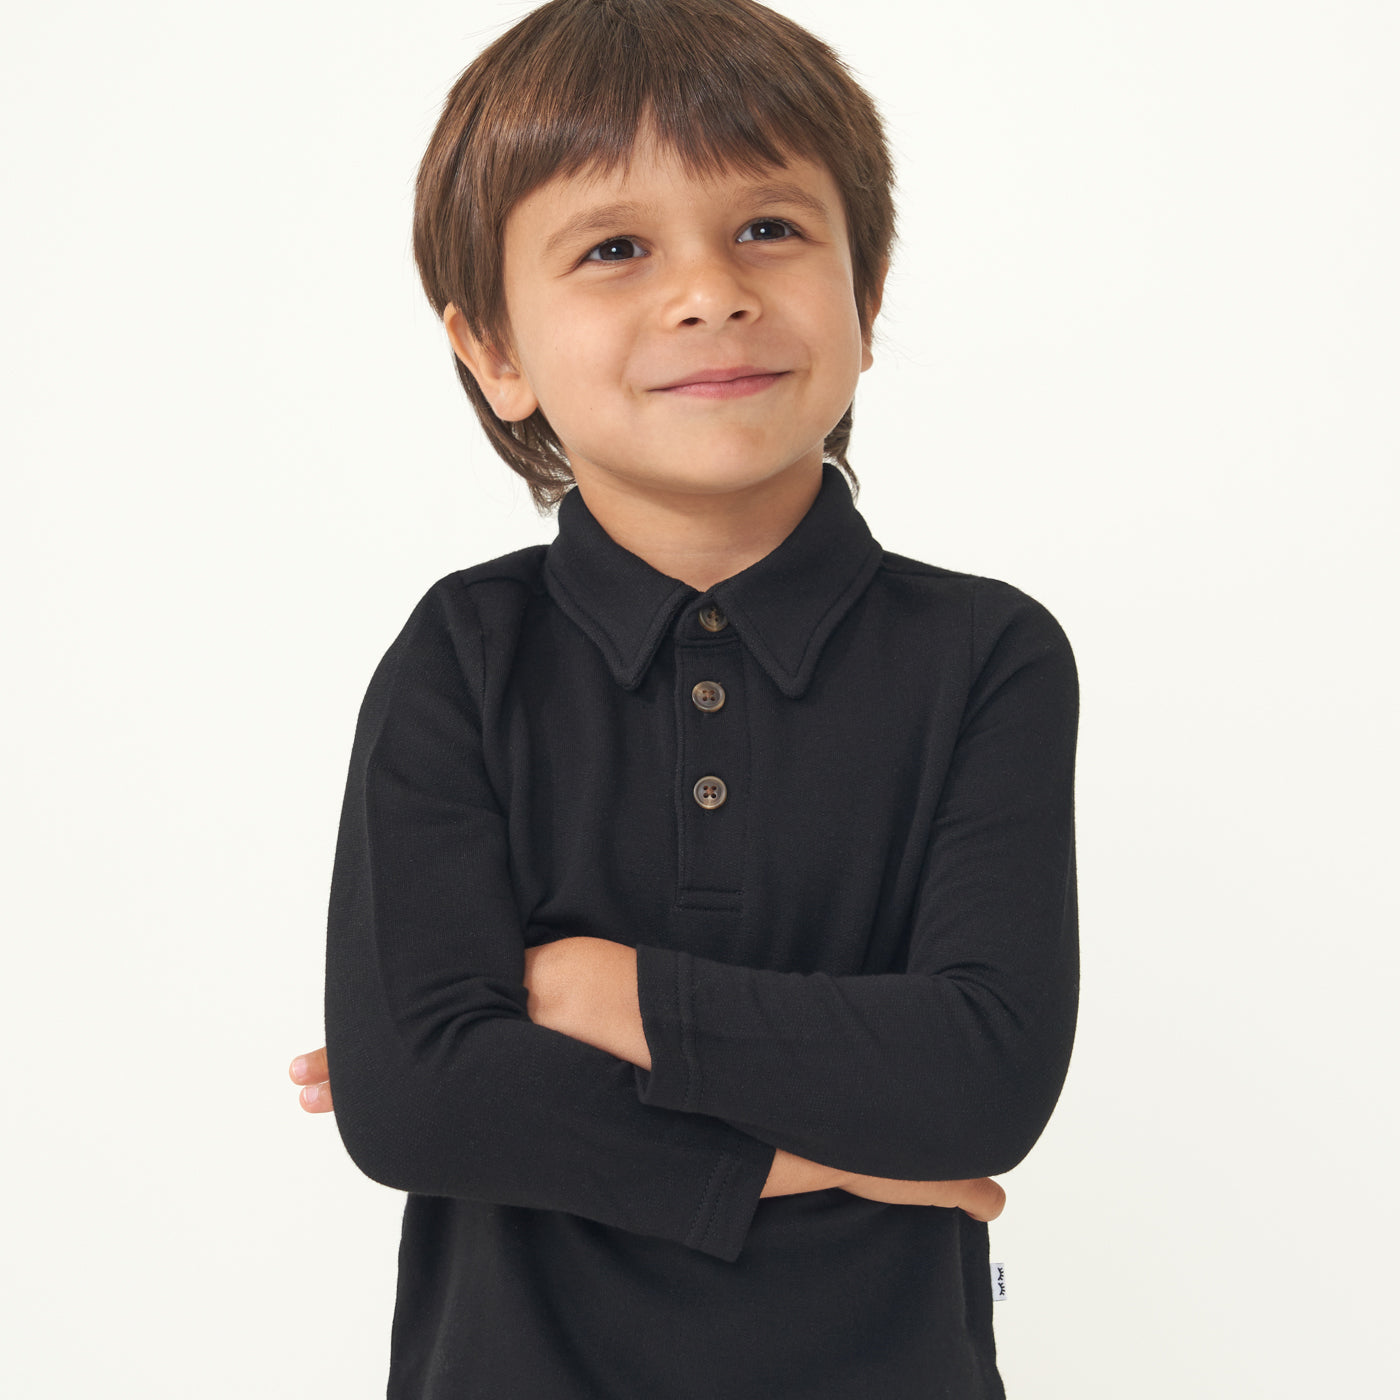 Child wearing a Black polo shirt with their arms crossed